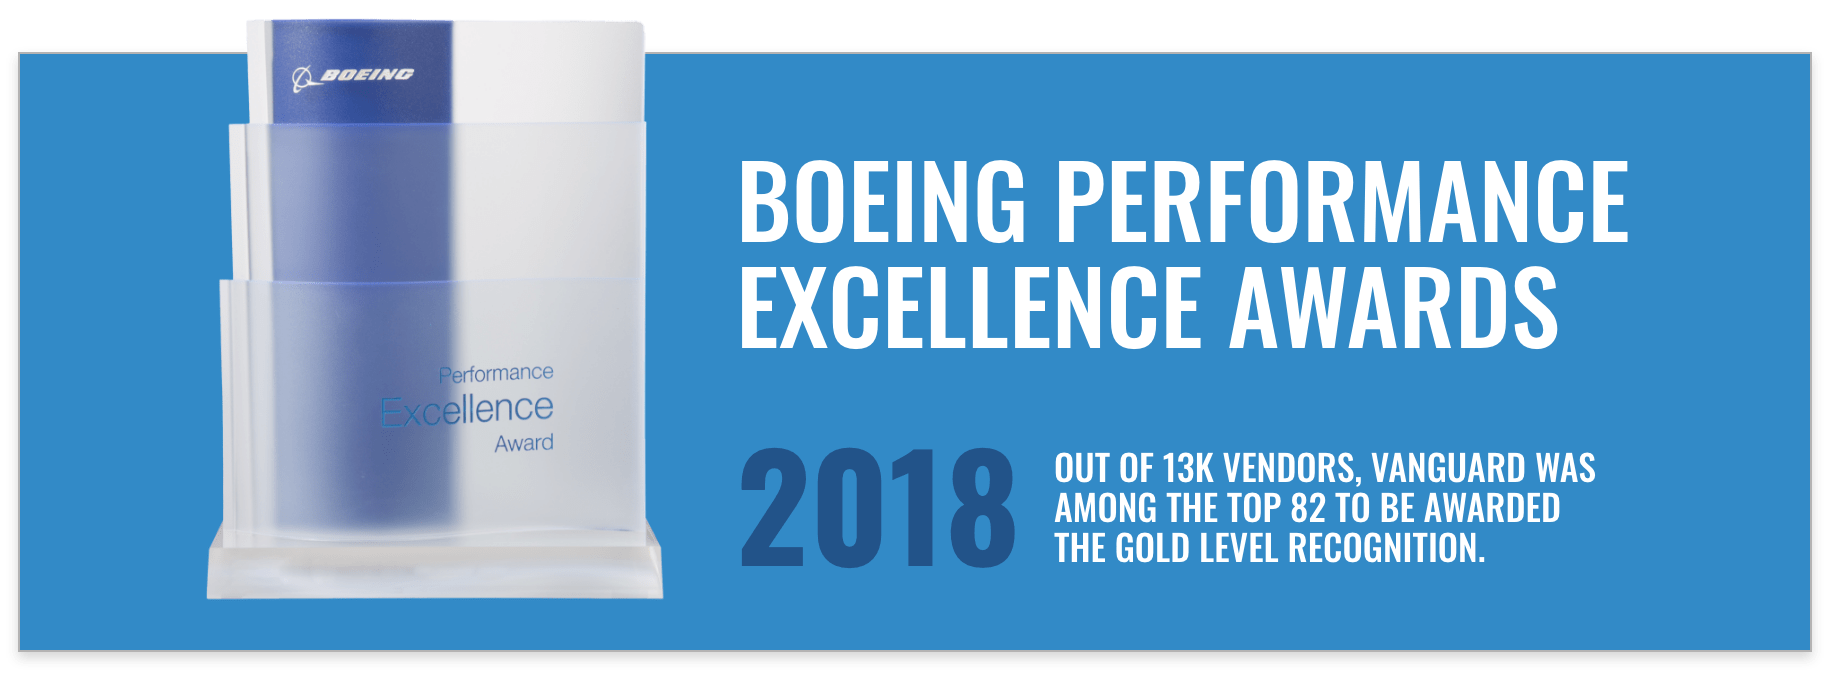 Boeing Performance Excellence Award 2018 